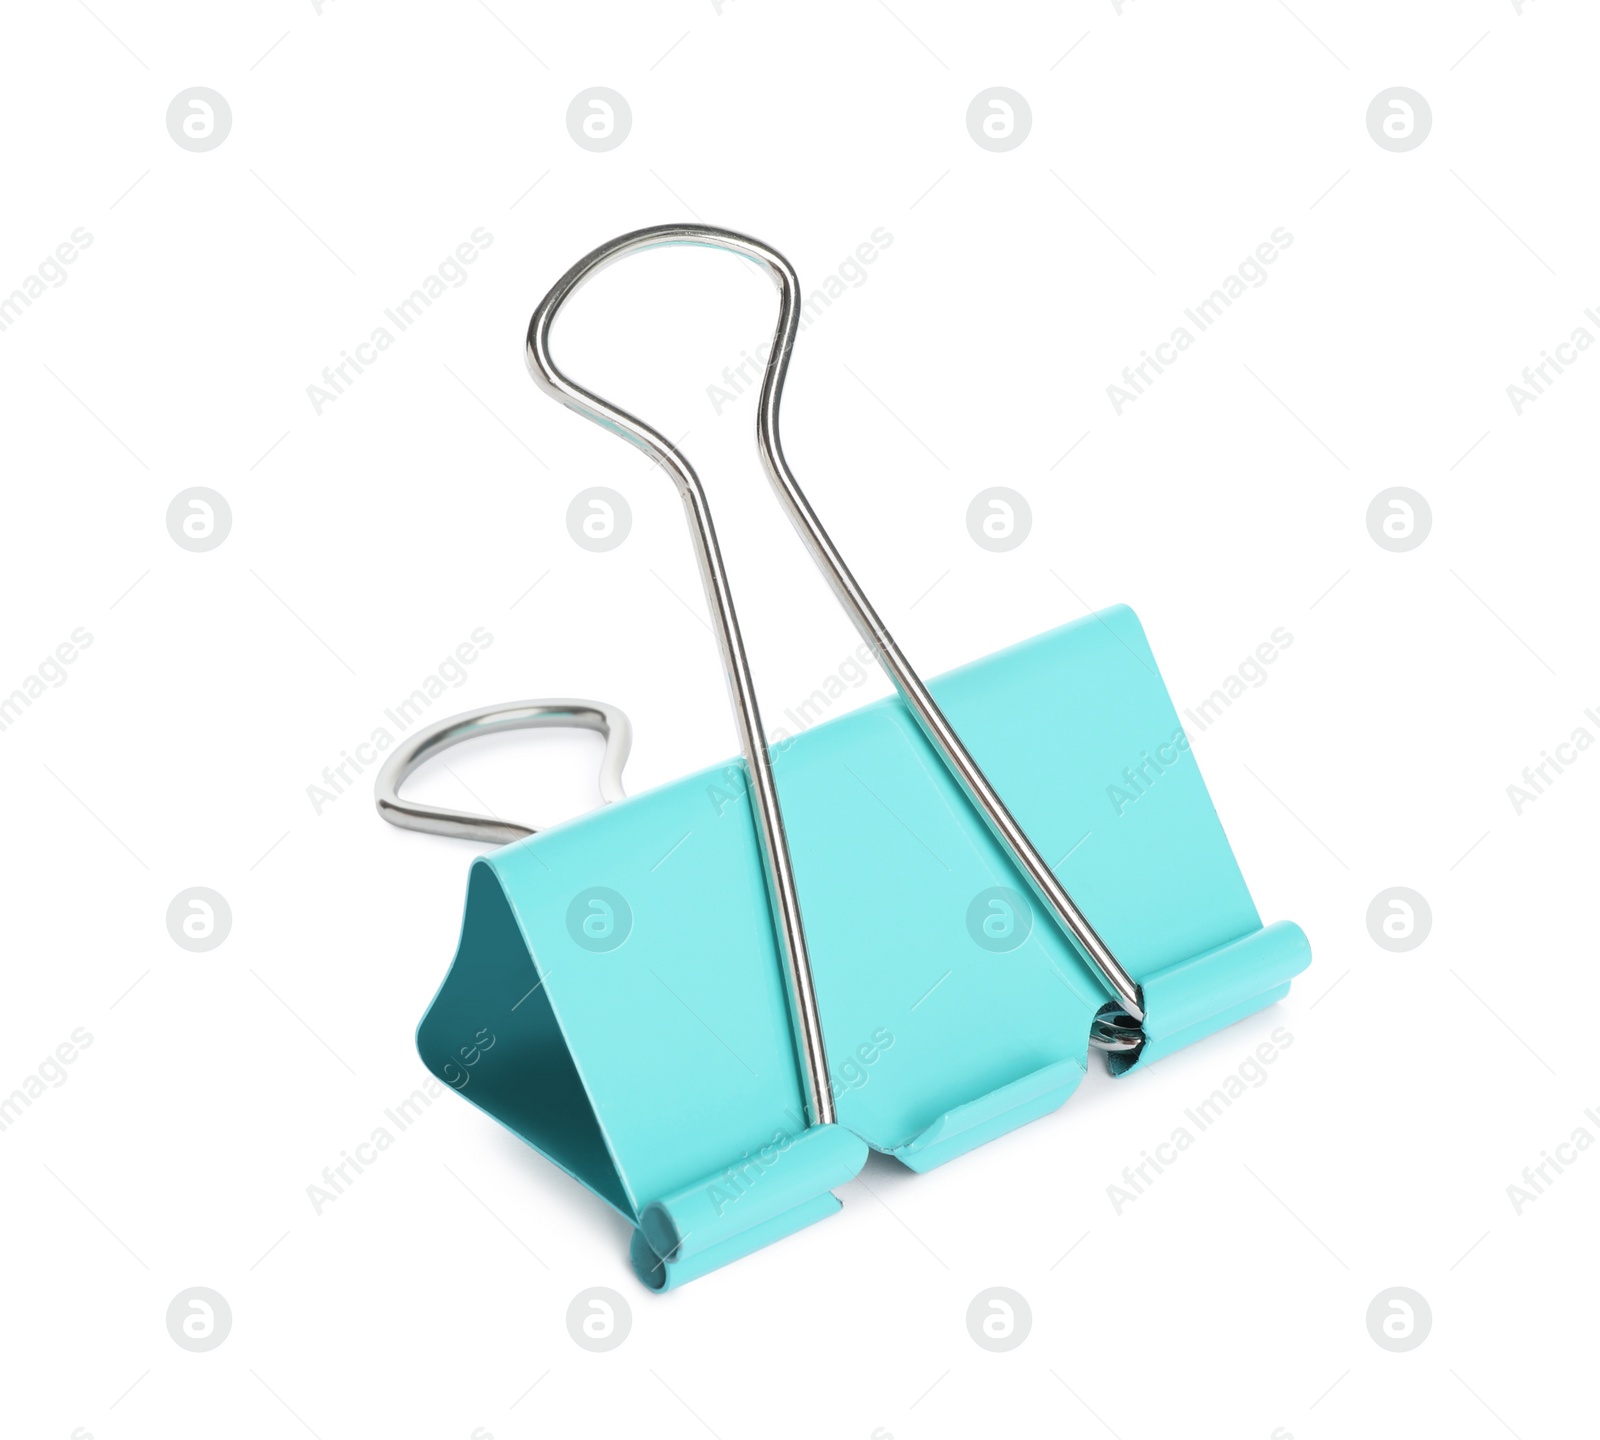 Photo of Turquoise binder clip isolated on white. Stationery